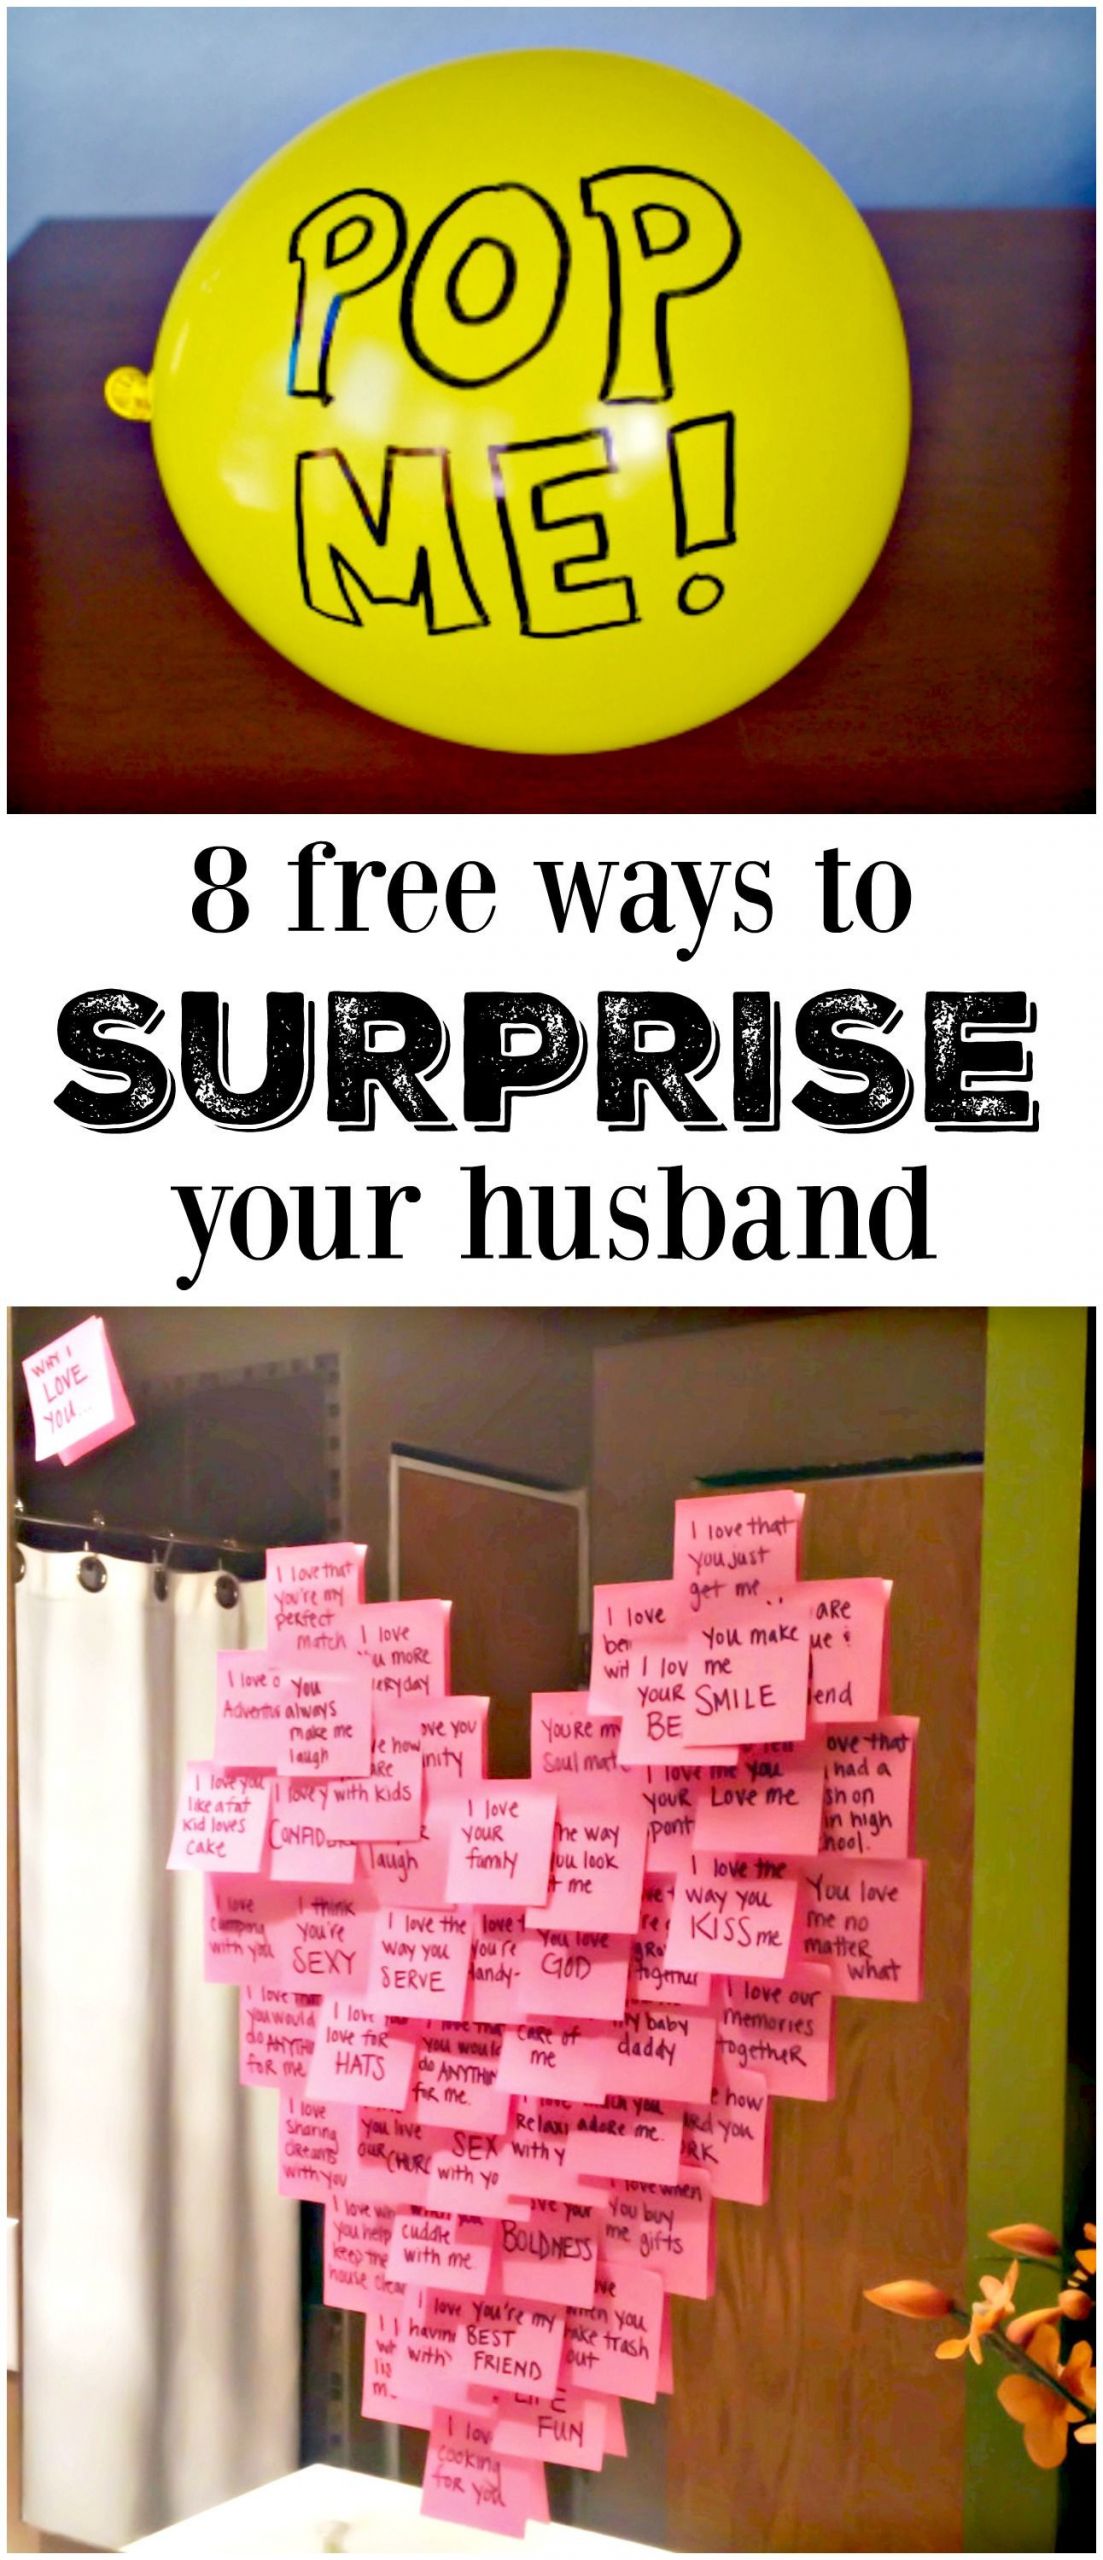 DIY Gifts For Wife
 8 Meaningful Ways to Make His Day DIY Ideas